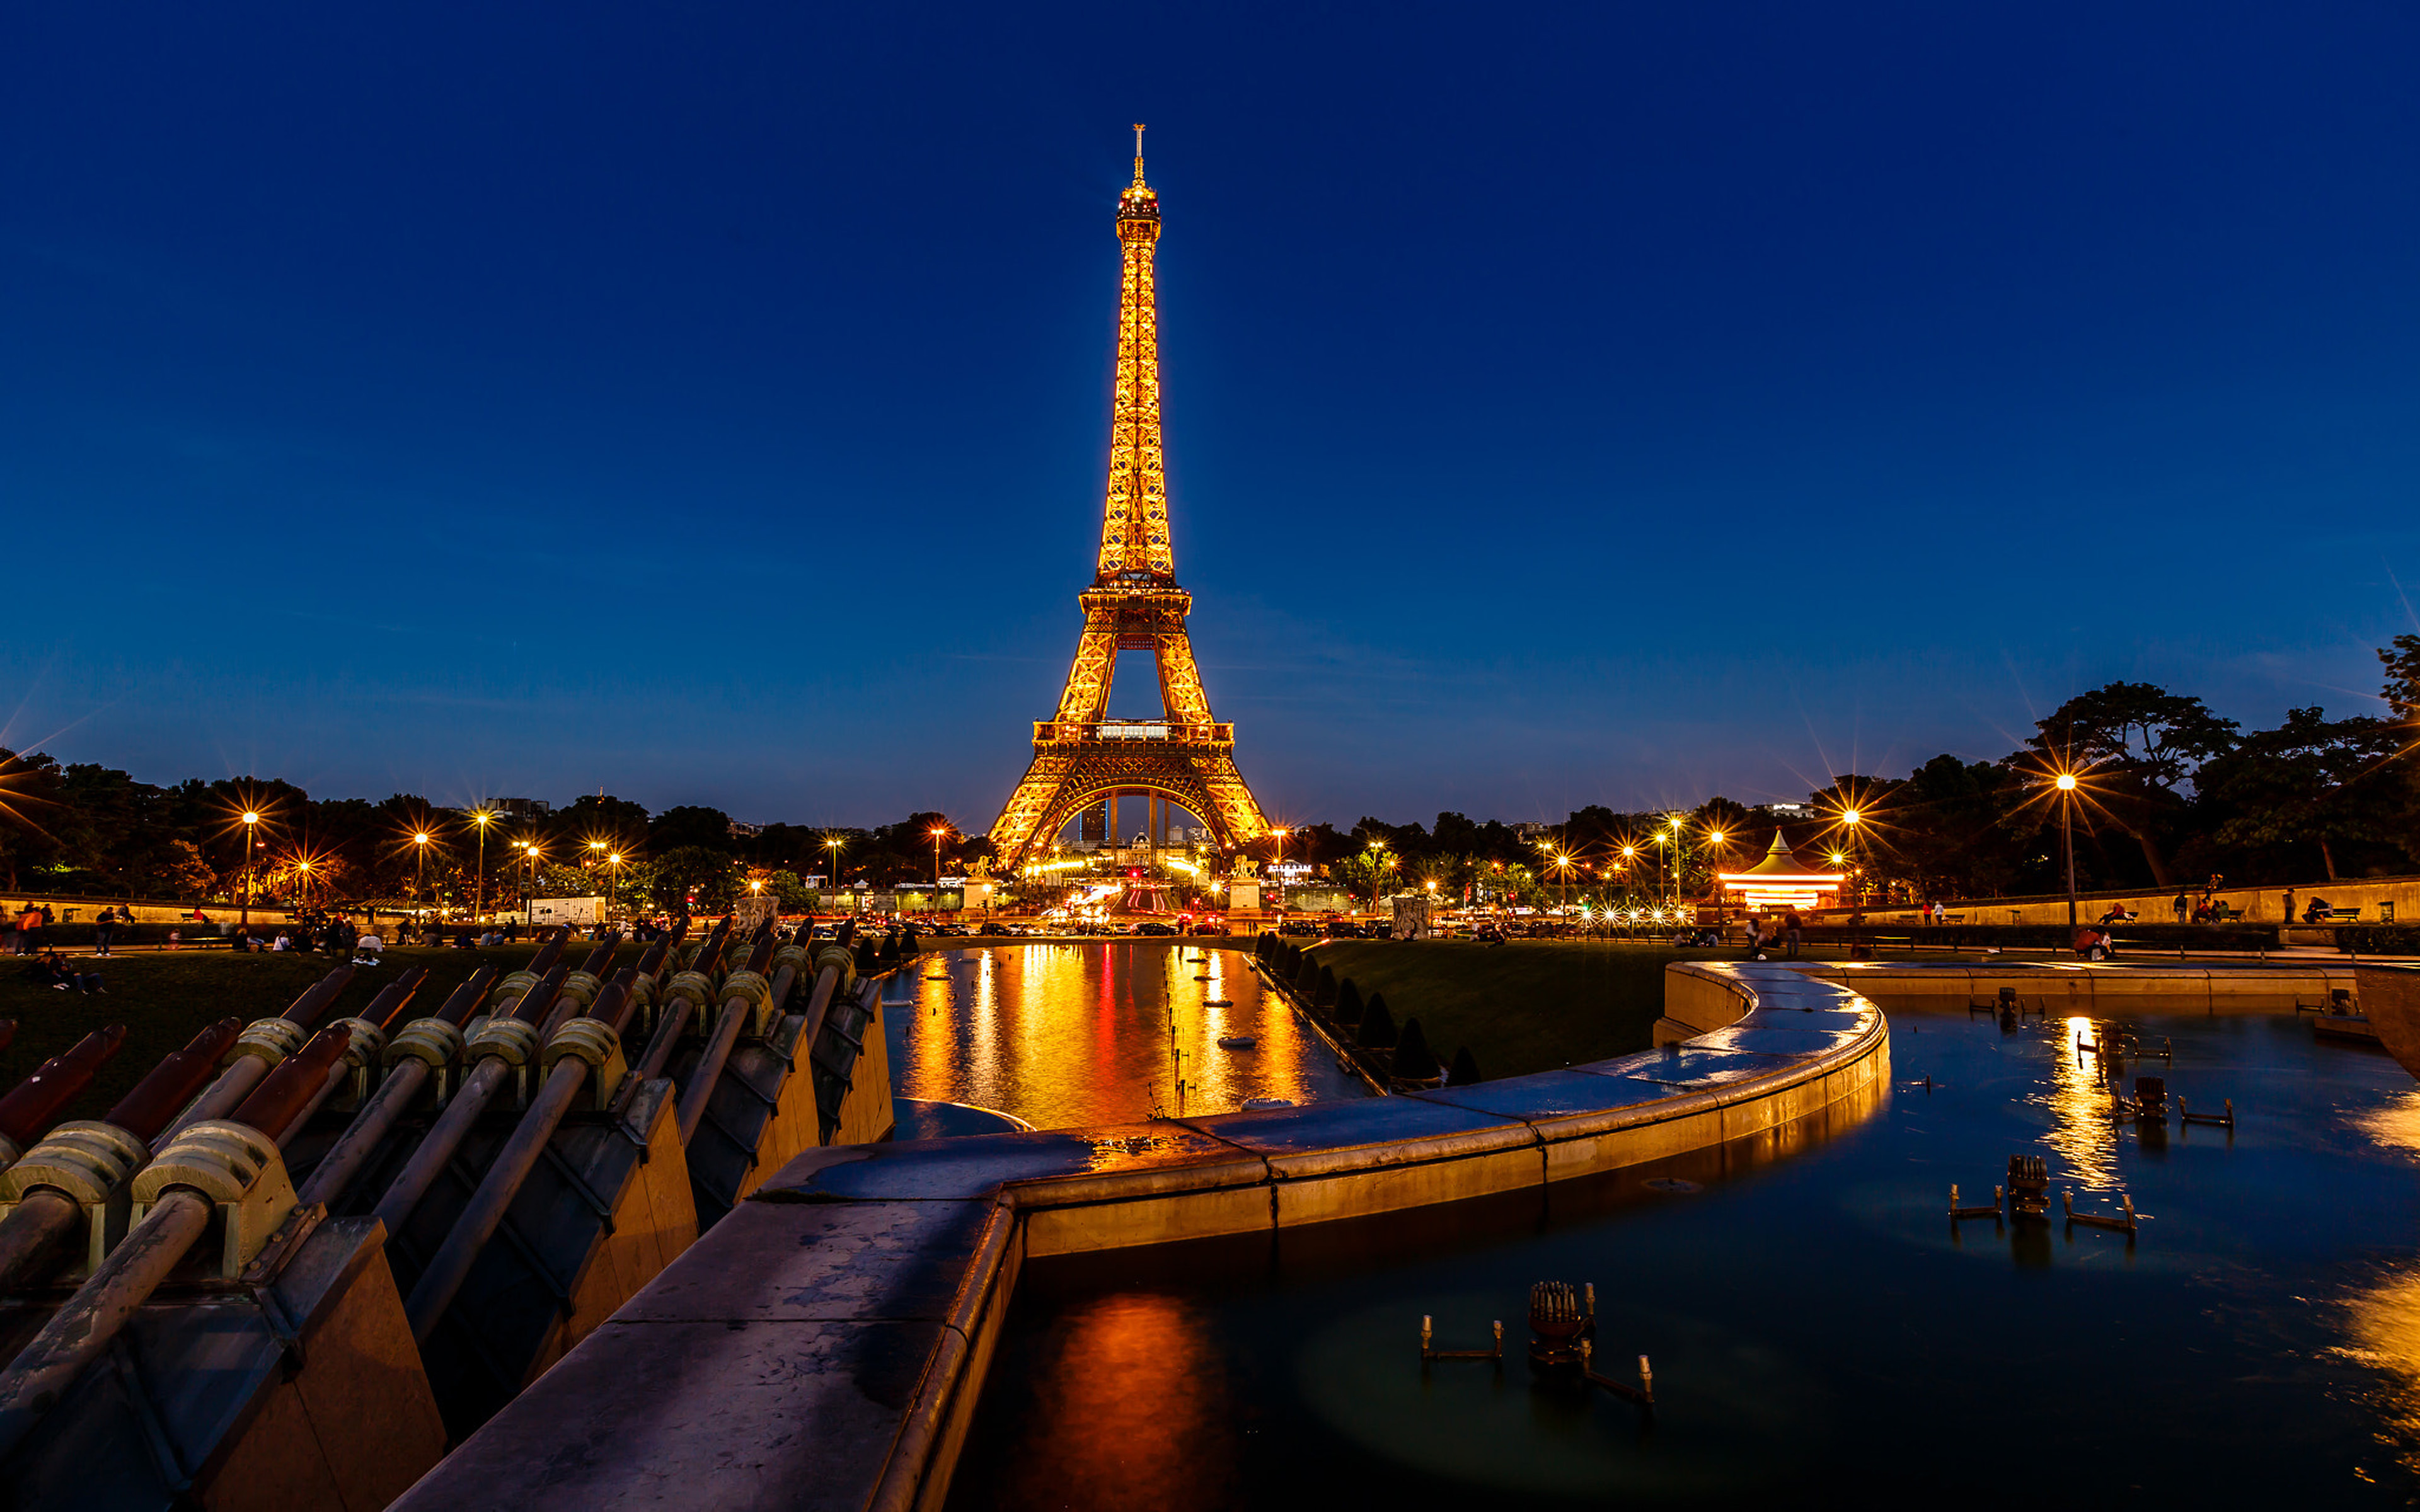 Trocadero Fountains In The Evening And Eiffel Tower Paris France Hd Of Paris Wallpaper Pc